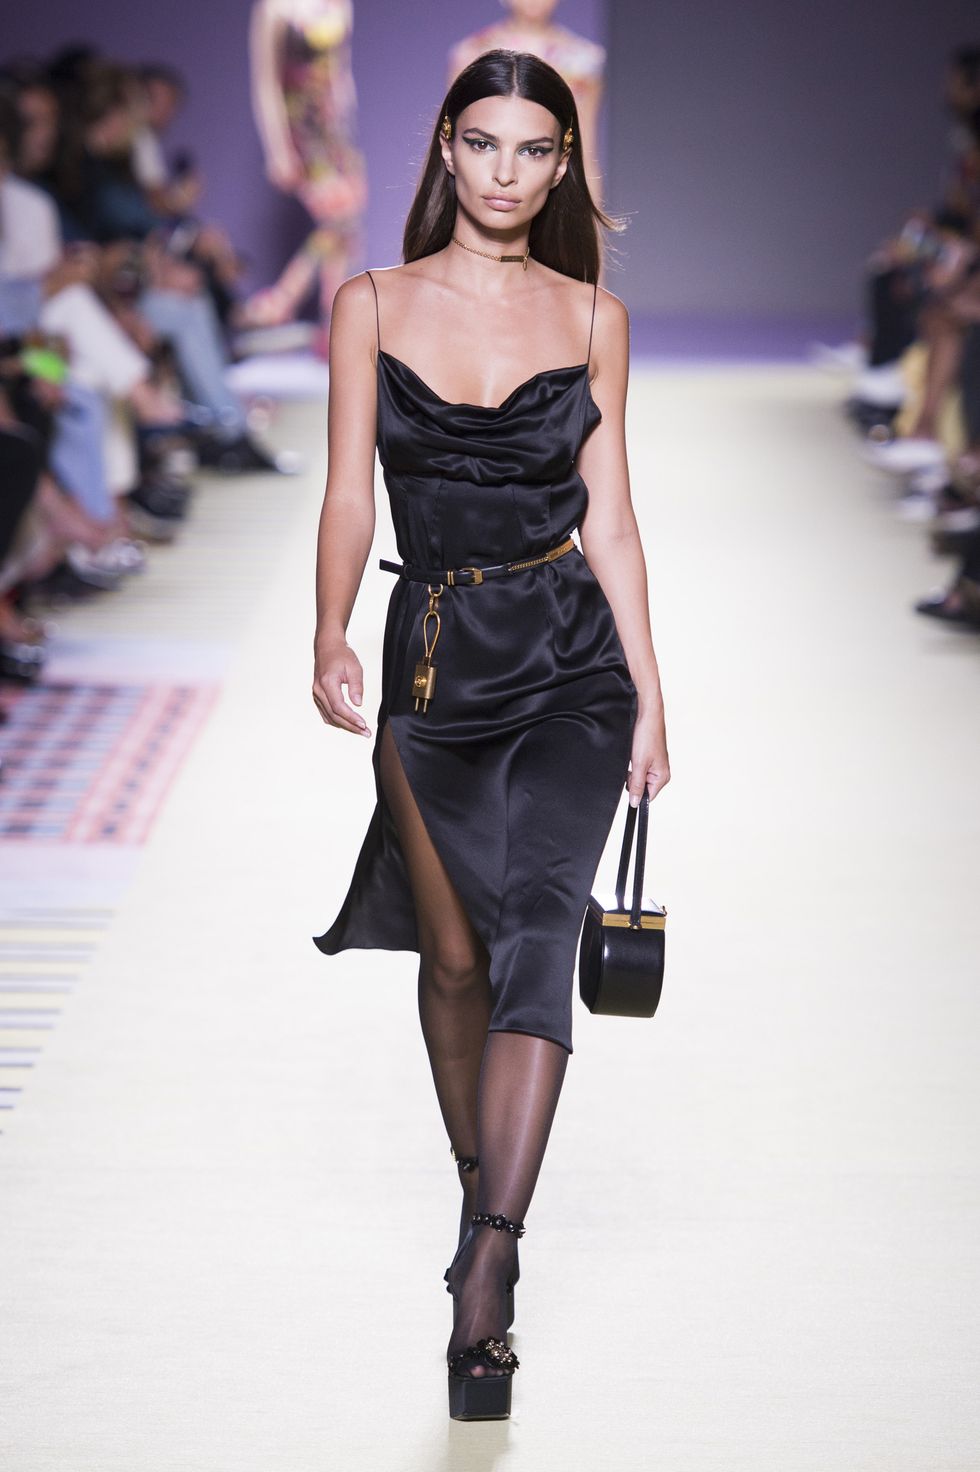 '90s Supermodel Shalom Harlow Returns to the Versace Runway - PAPER